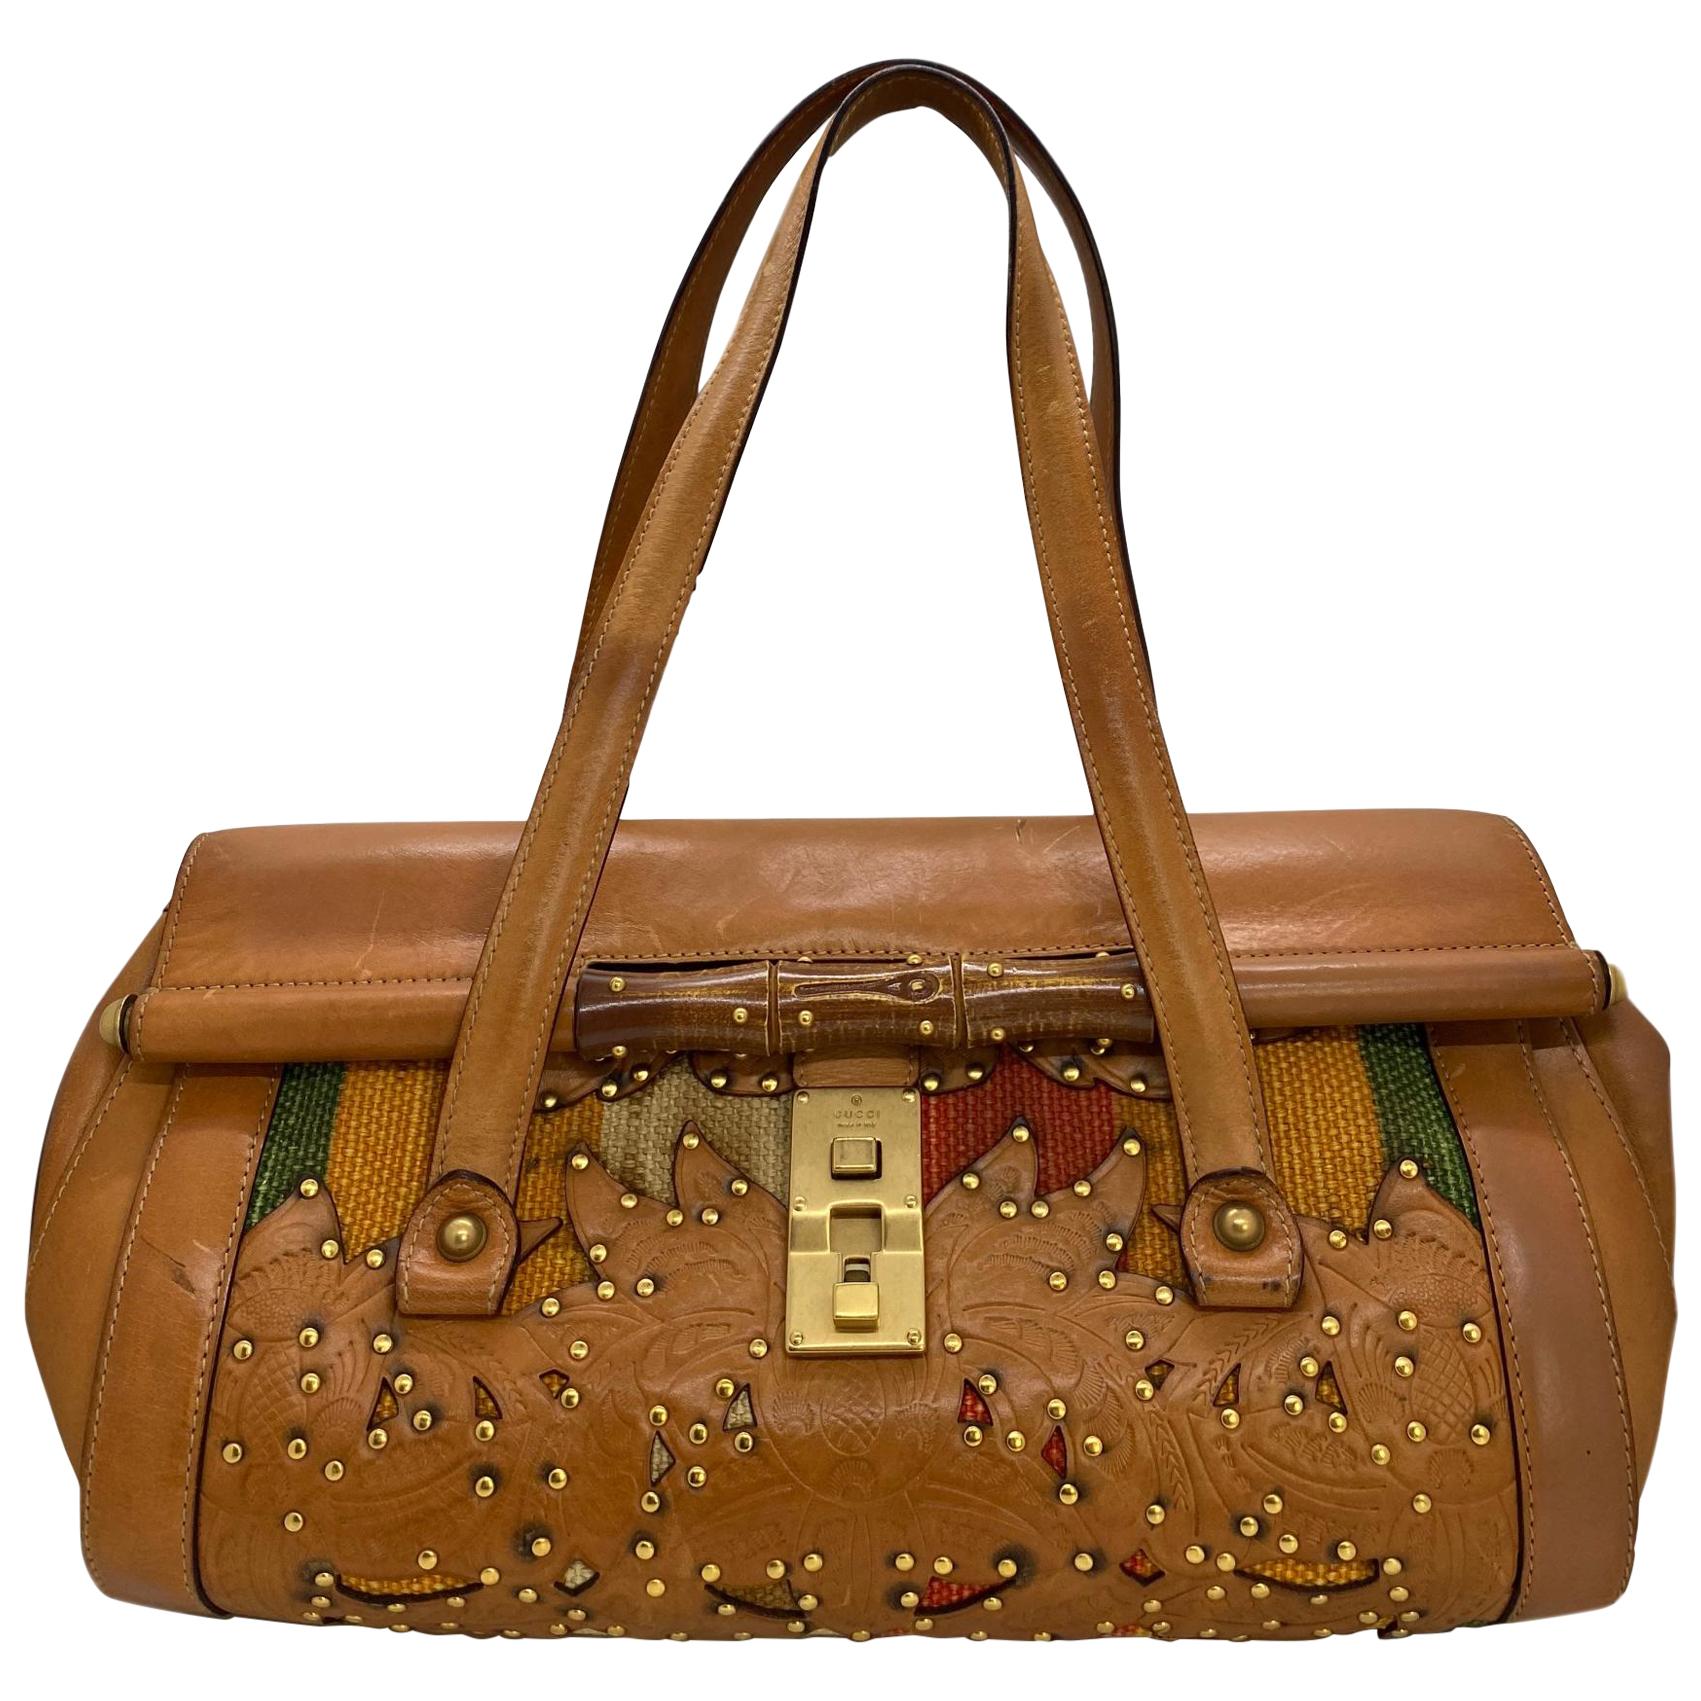 Gucci Bamboo Bullet Leather Studded Limited Edition Tri-Color Handbag.